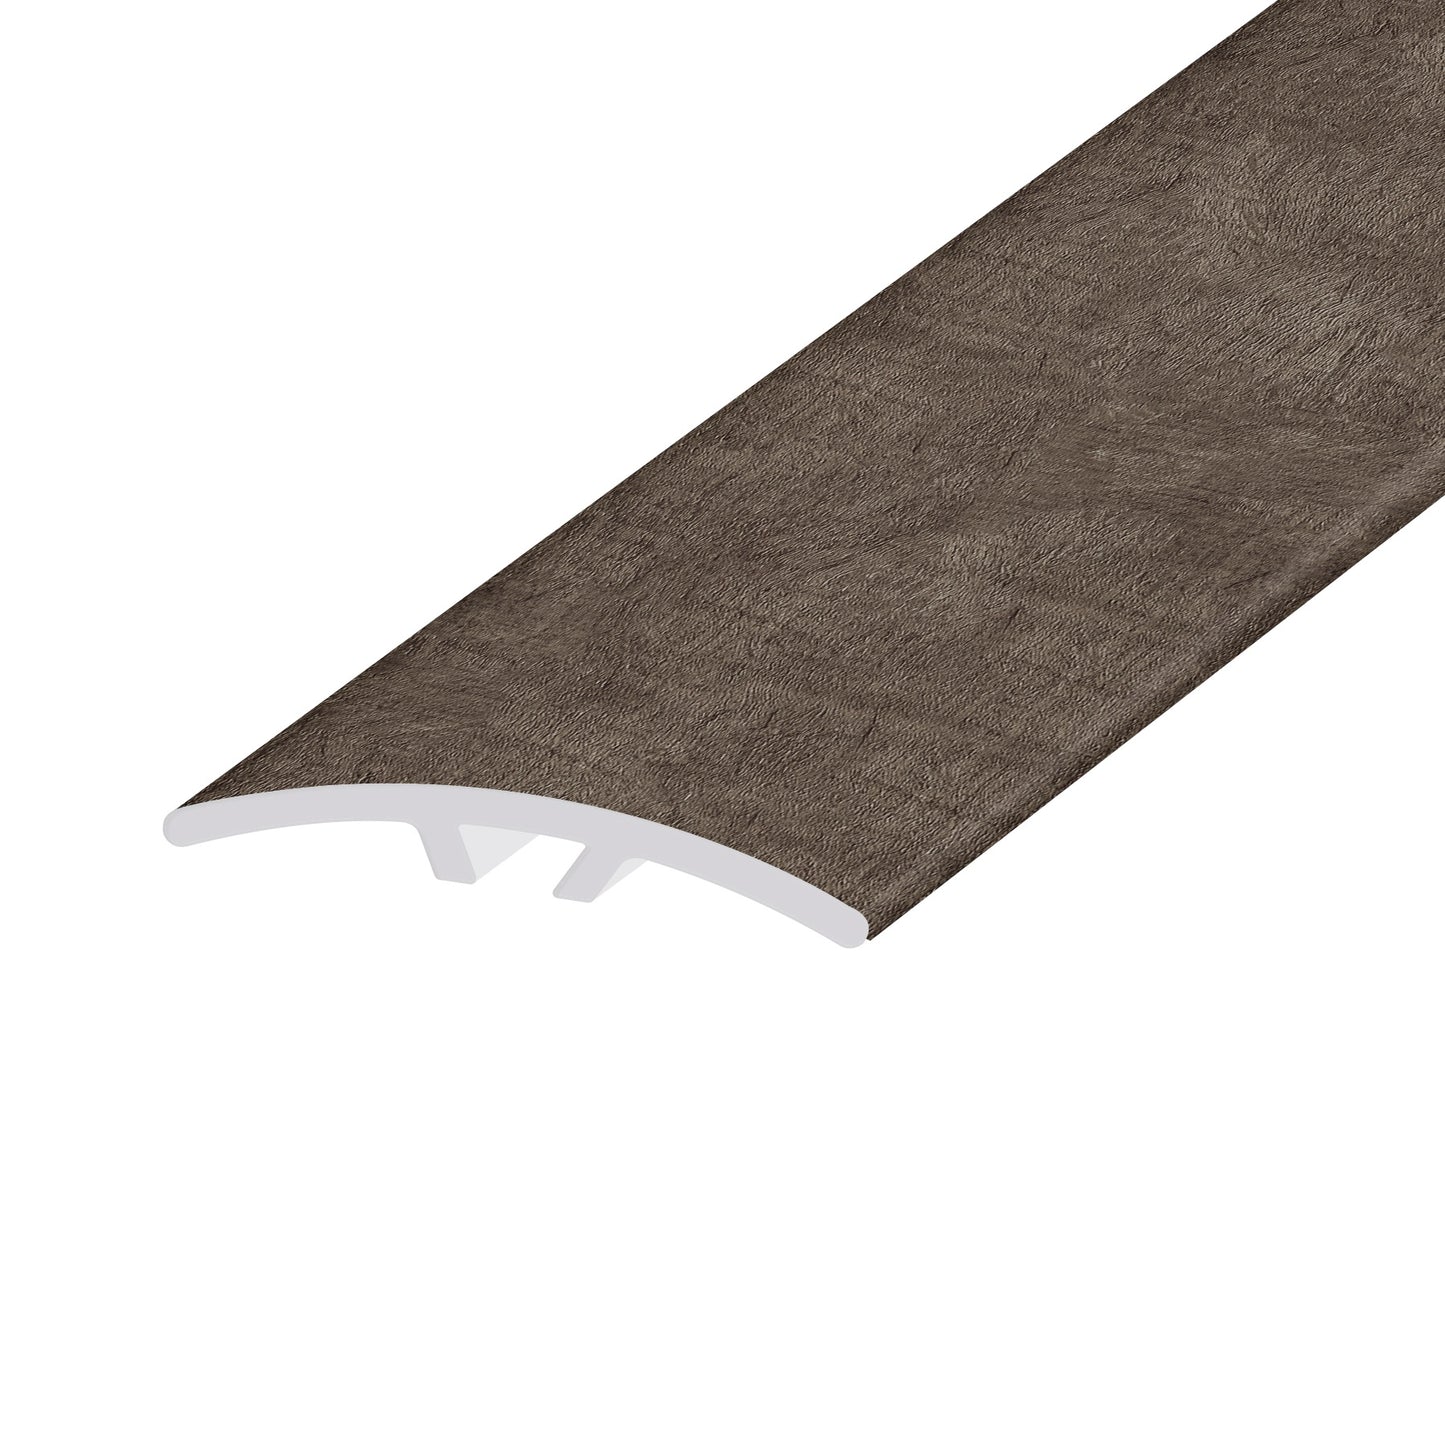 Twilight Gray 0.23 in. Thich x 1.59 in. Width x 94 in. Length Multi-Purpose Reducer Vinyl Molding